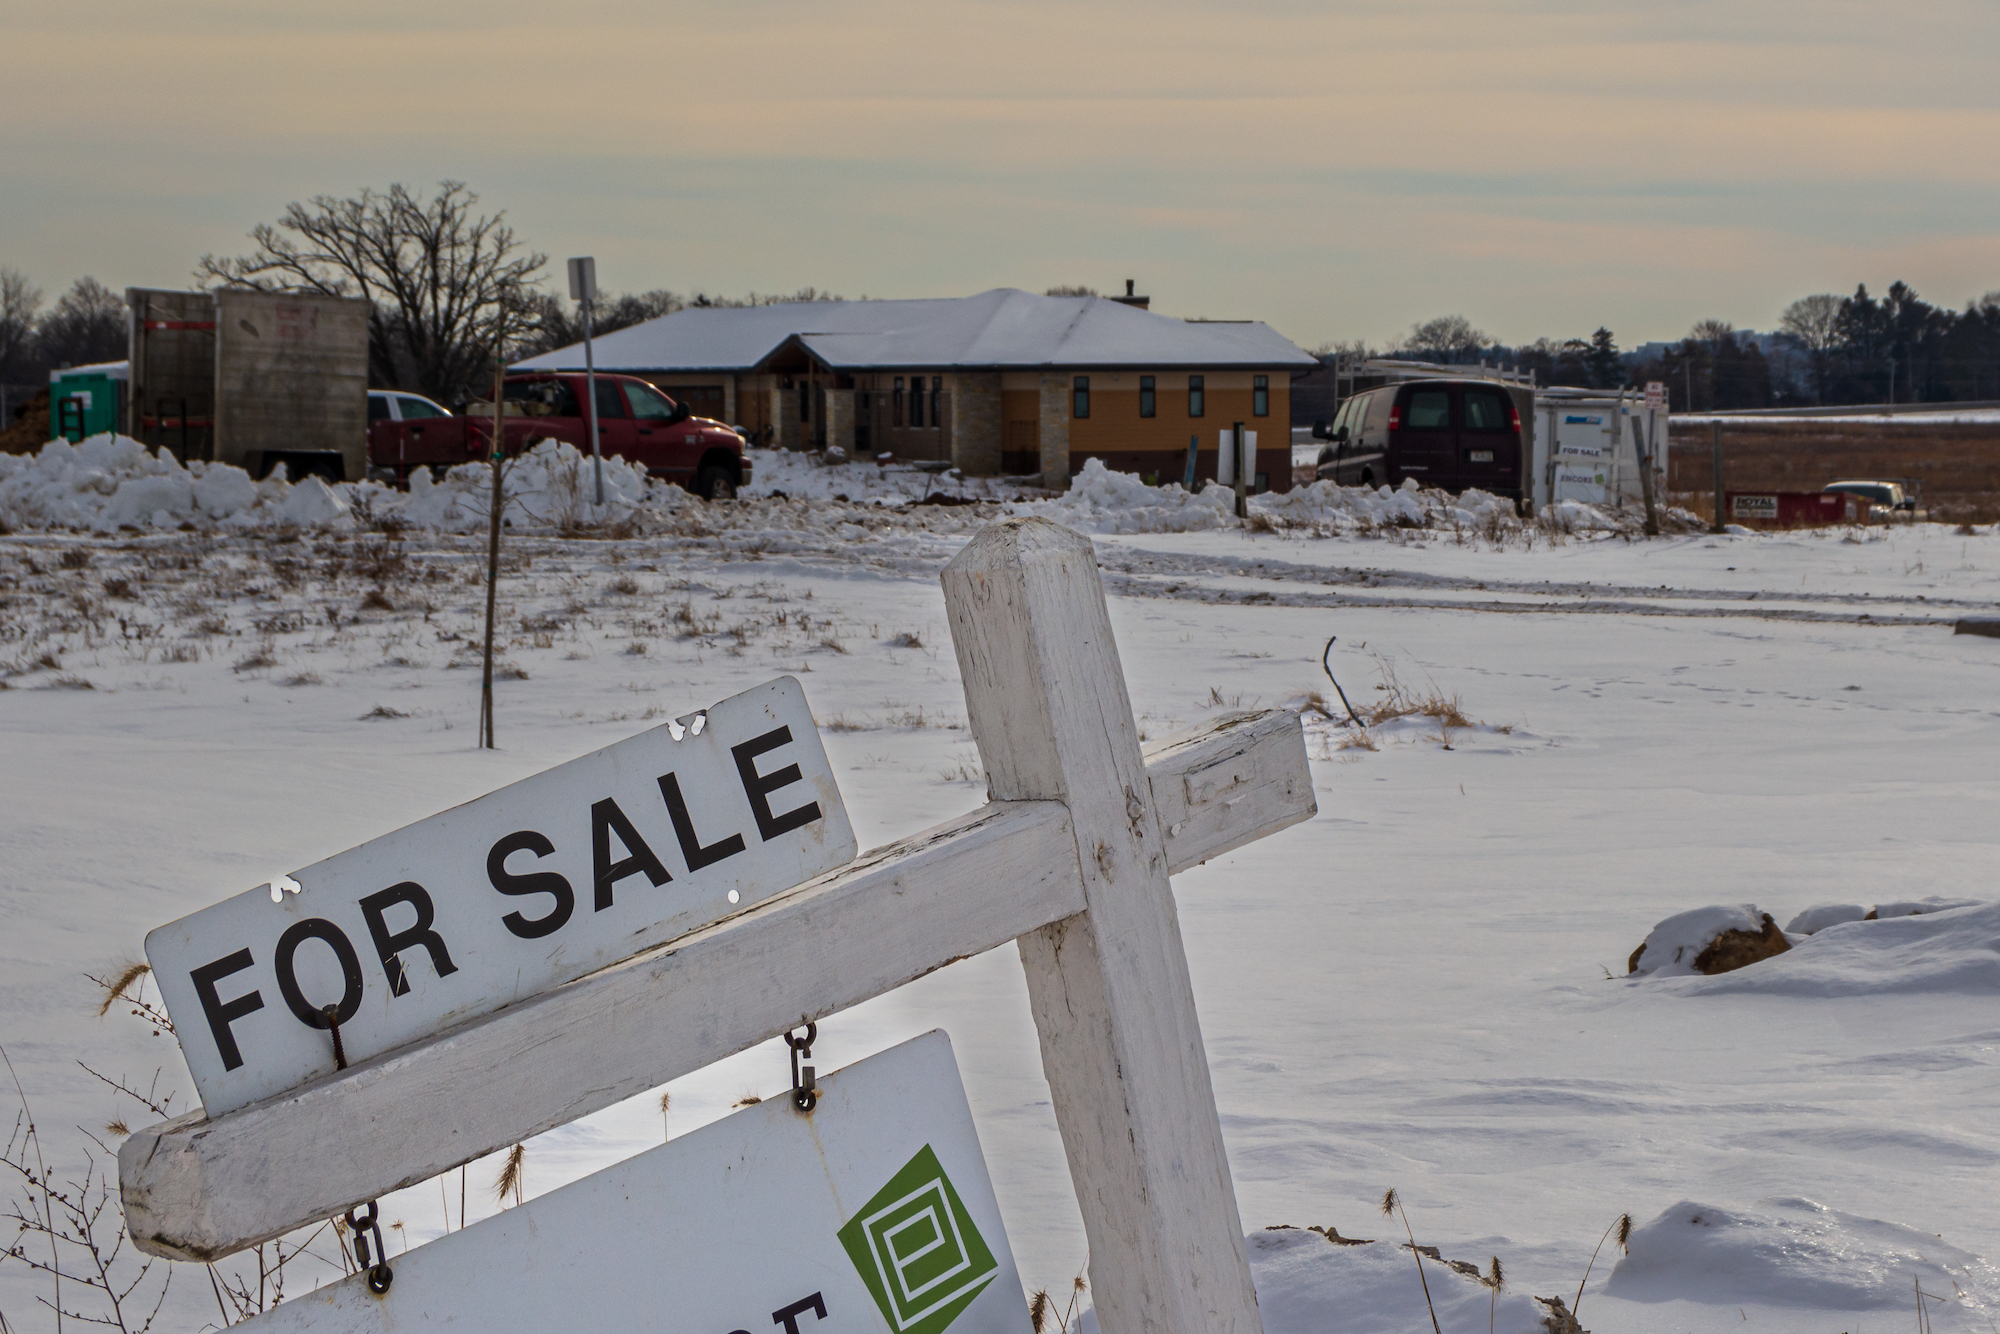 A lot for sale near Waunakee, Wis. on Jan. 4, 2022.